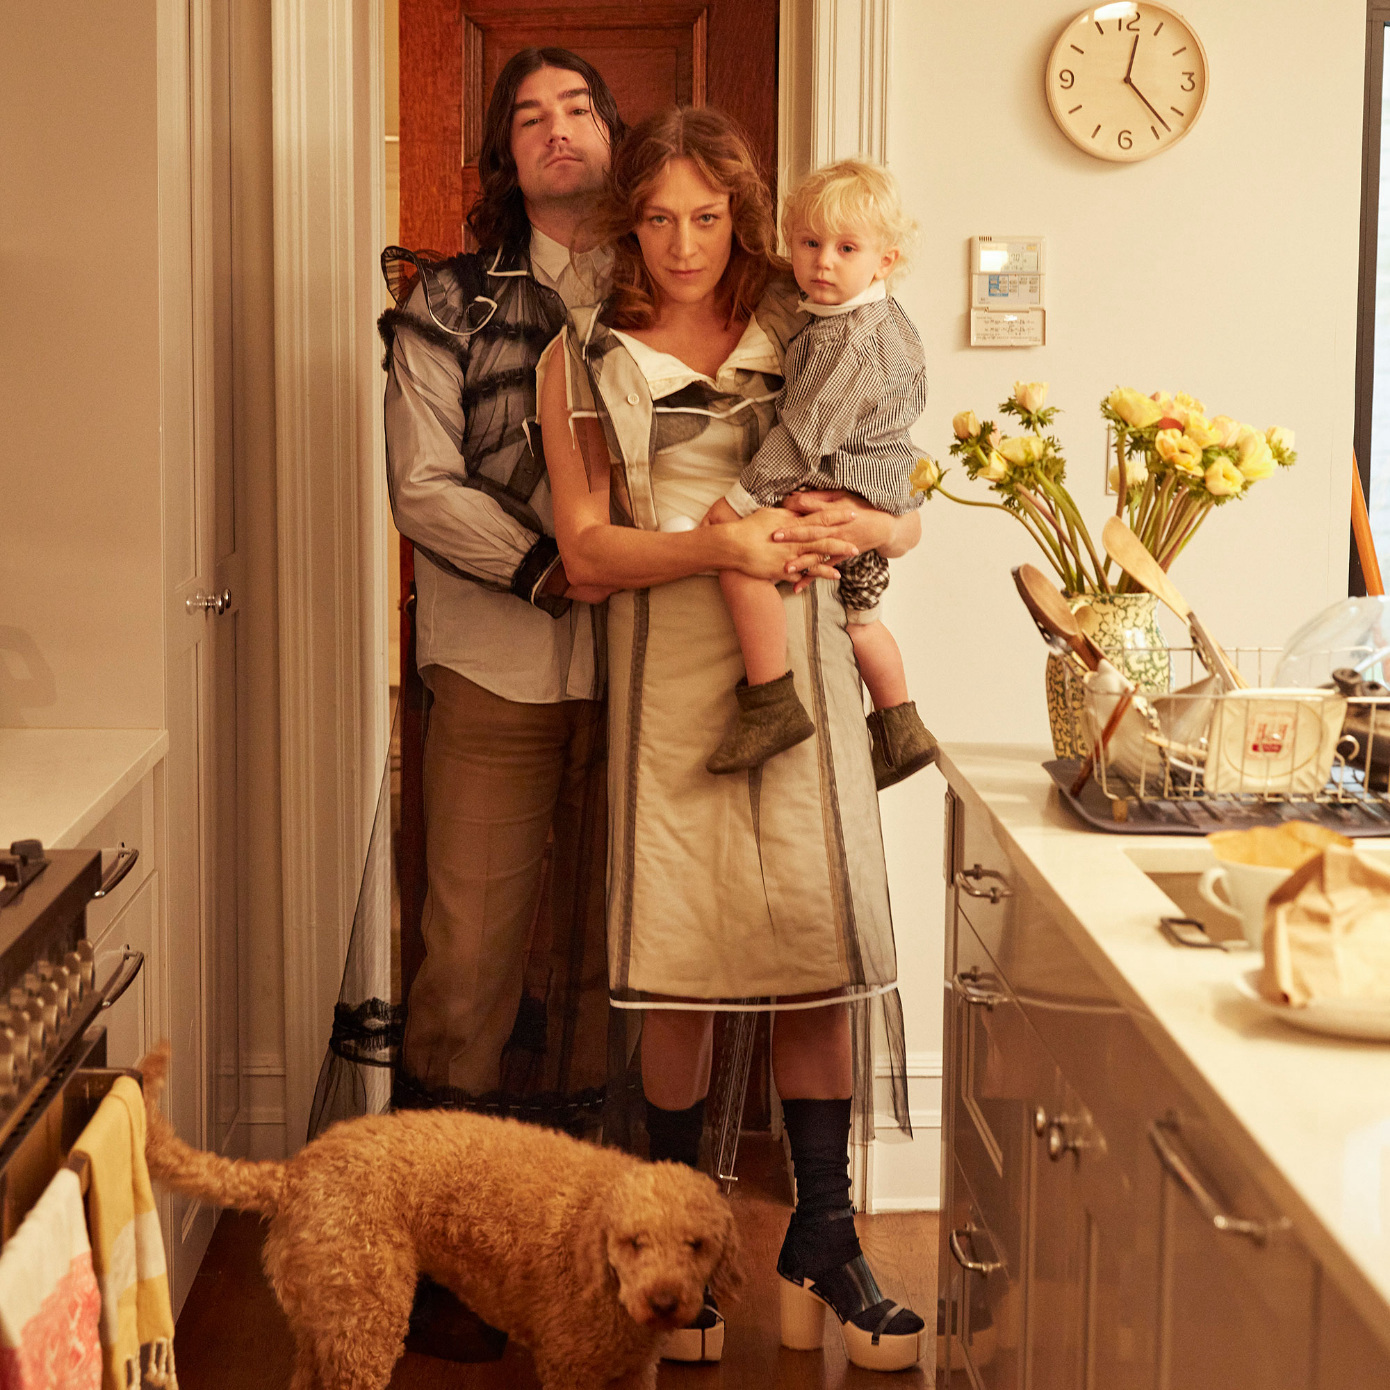 family in kitchen with baby and dog